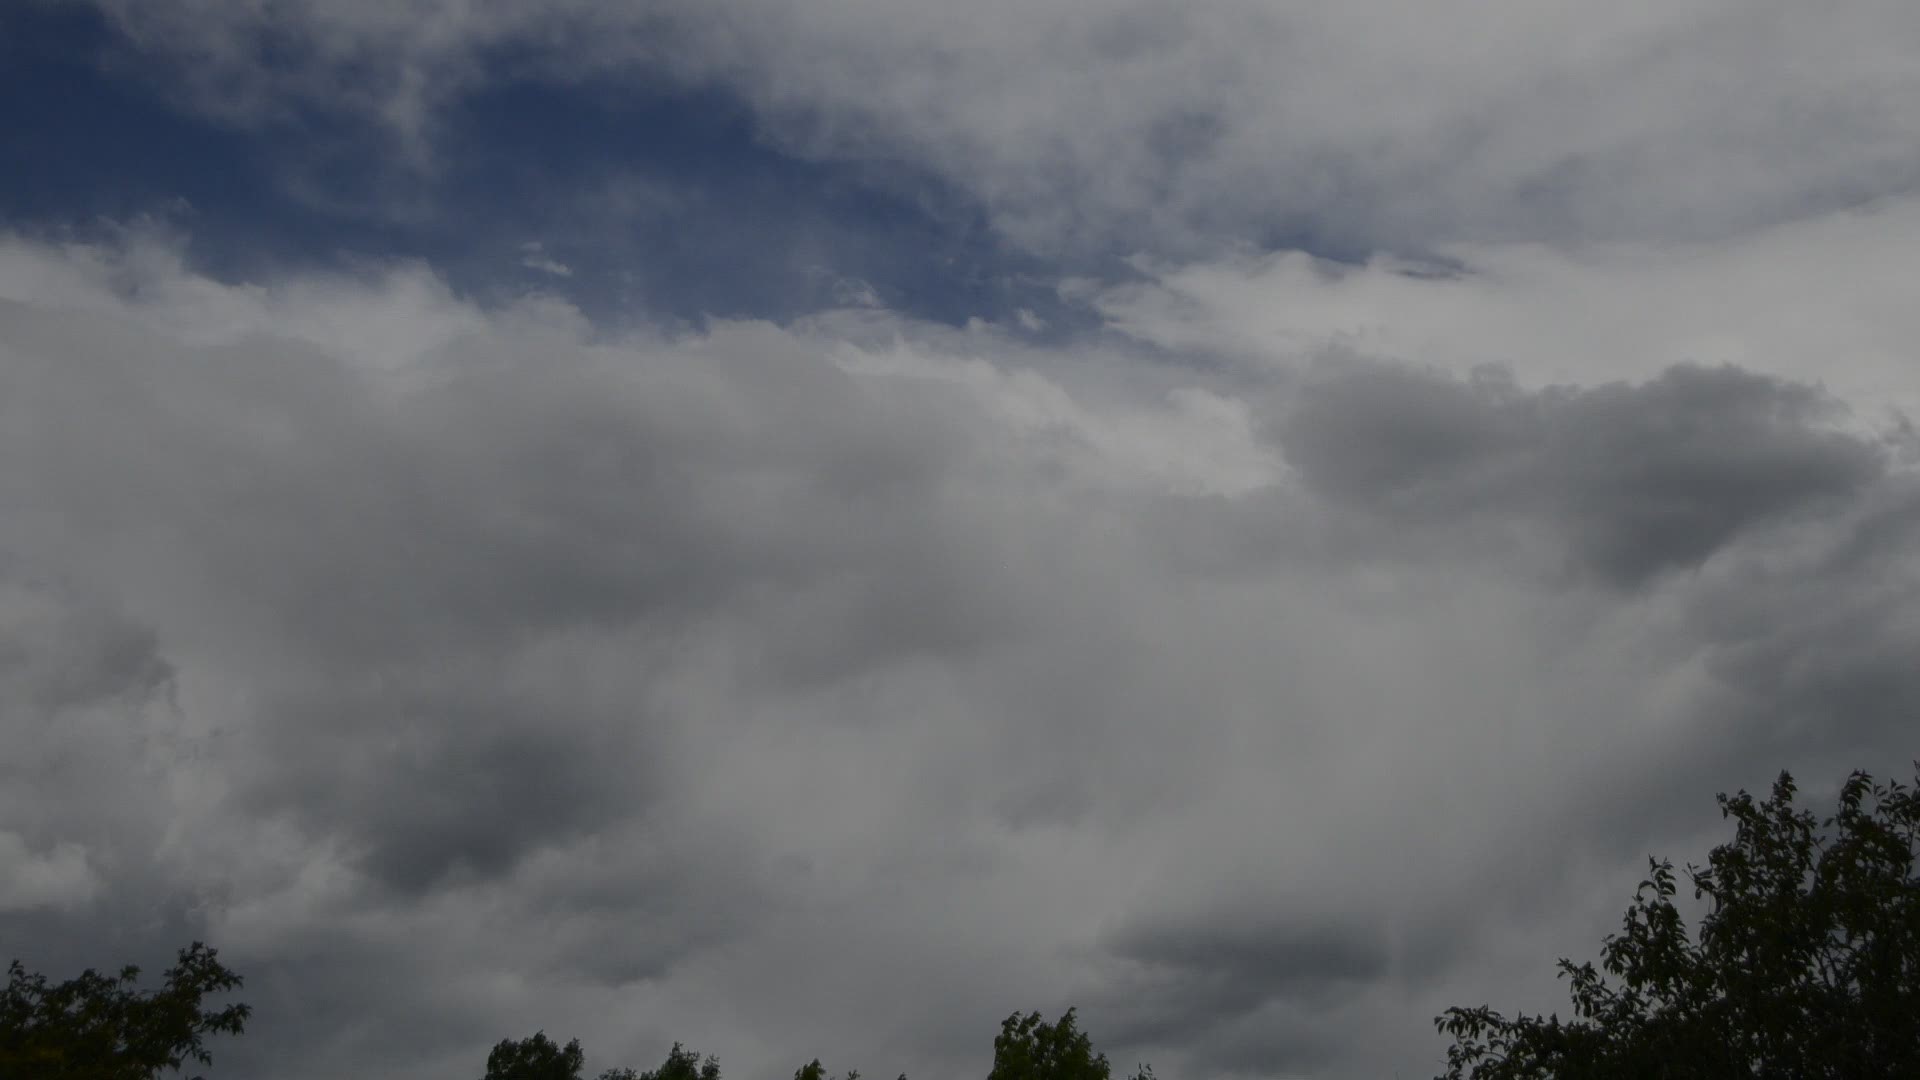 Clouds time lapse in Westminster during June 6 storms